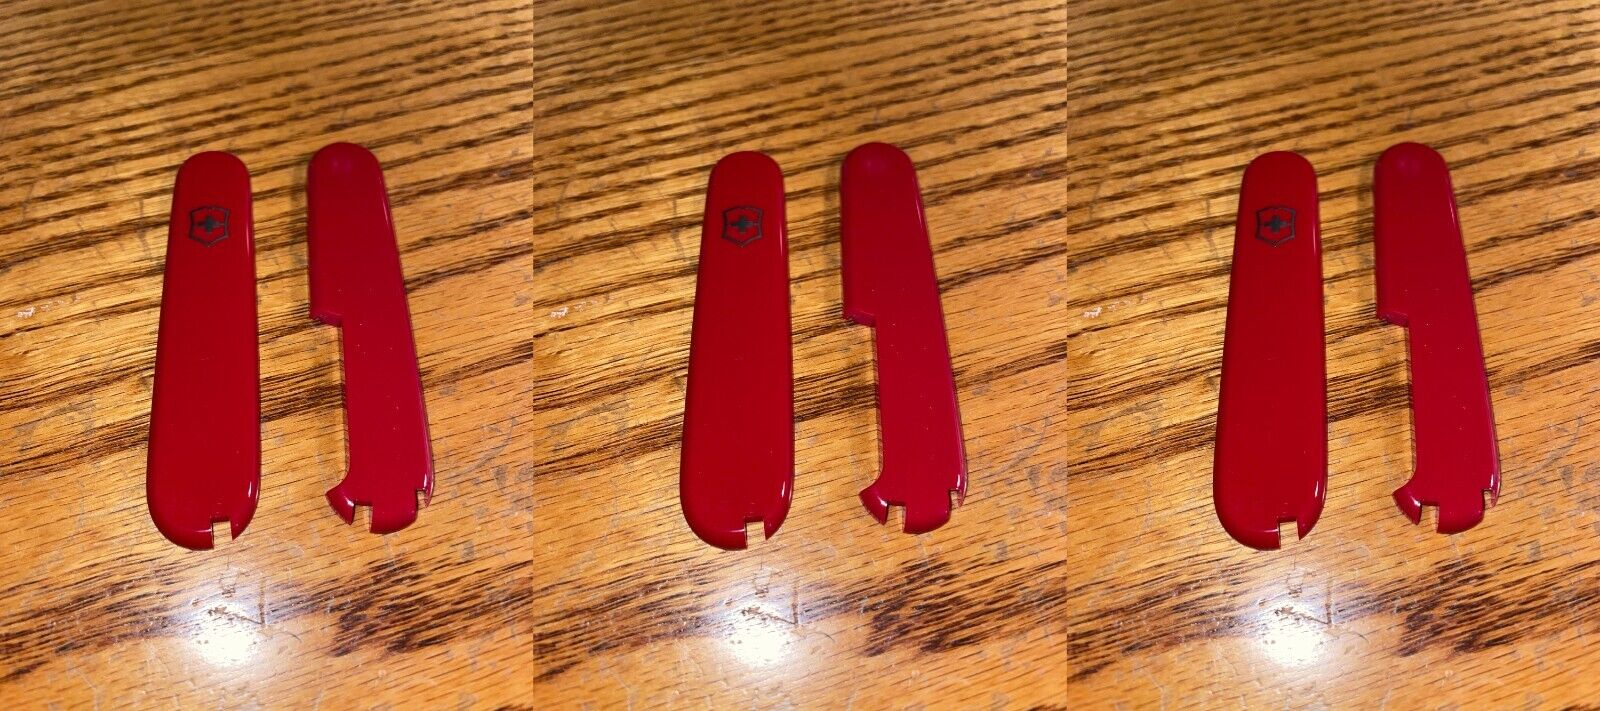 Pre-Owned Lot of 3 Victorinox 91mm PLUS HANDLES   2 Piece KIT in RED